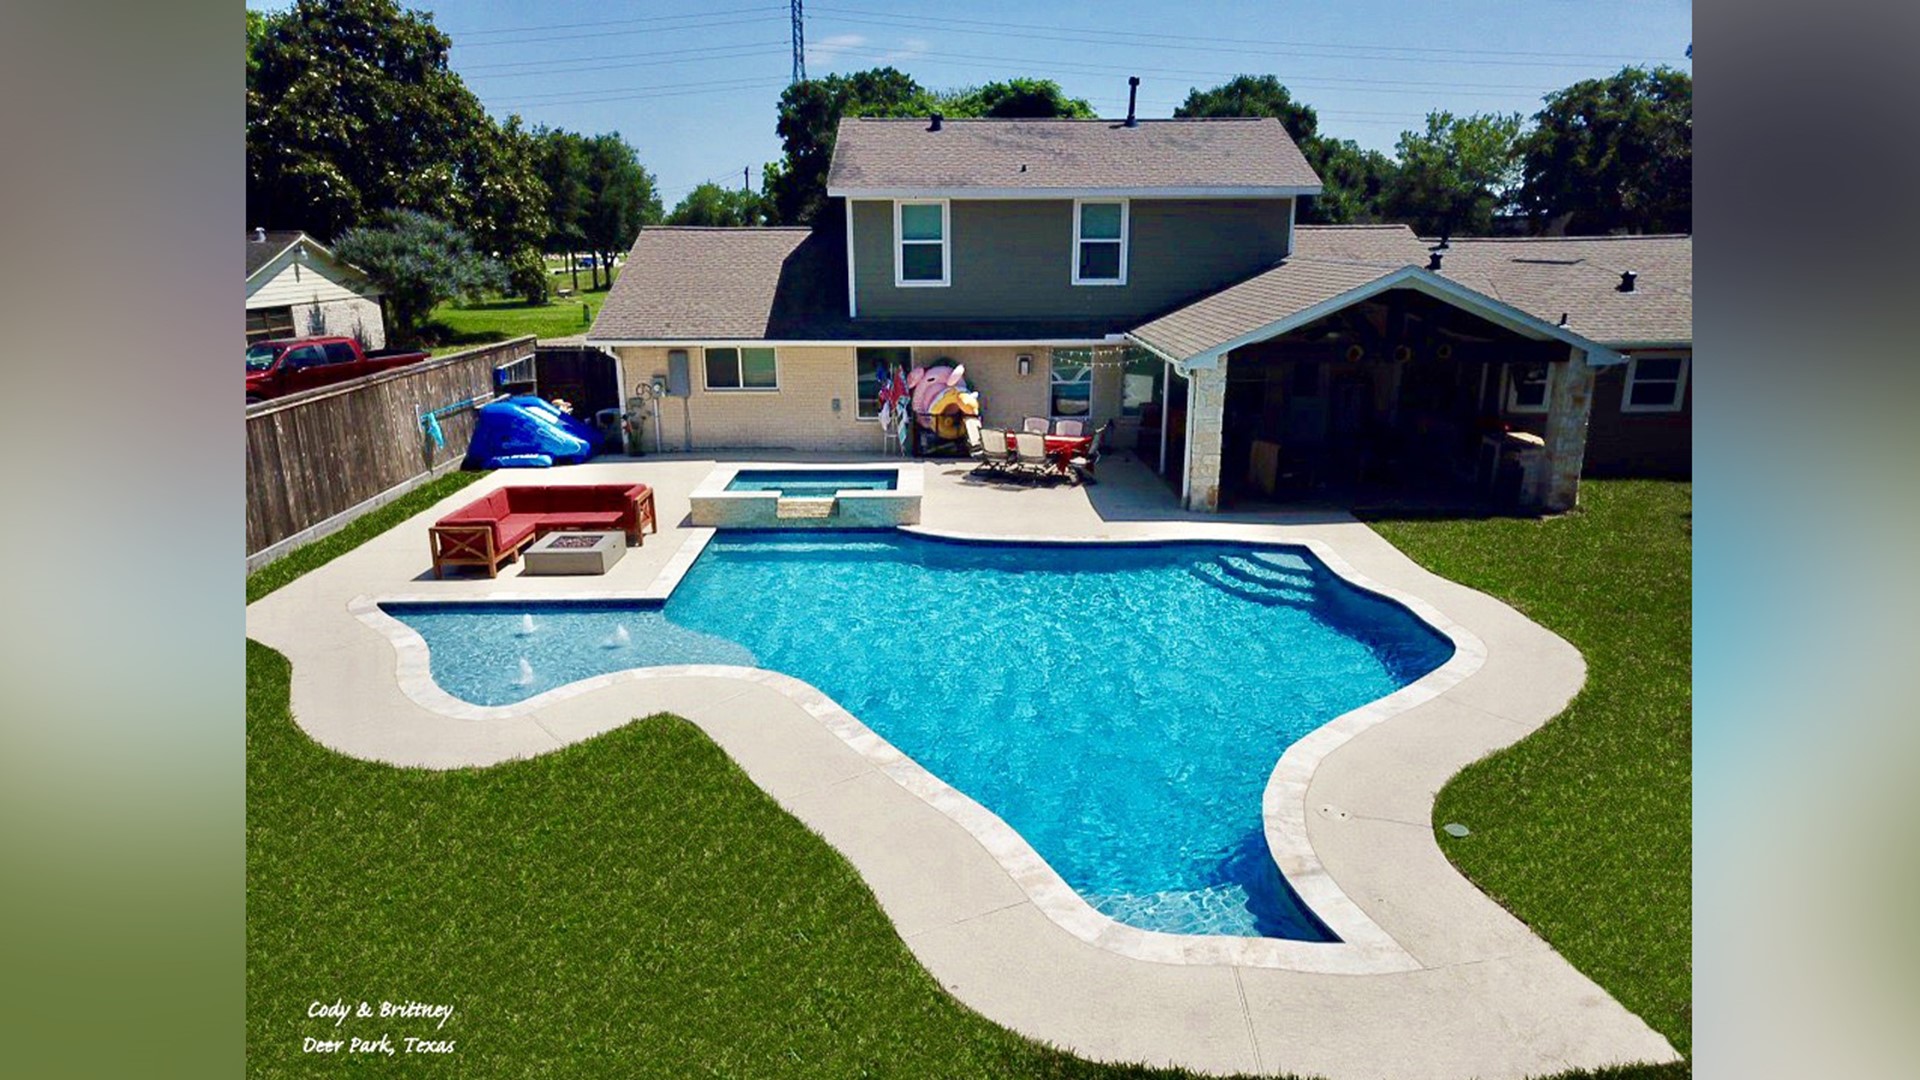 Check out this big beautiful pool behind a family's house in Pasadena - near Houston. They installed it just in time for summer 2019.